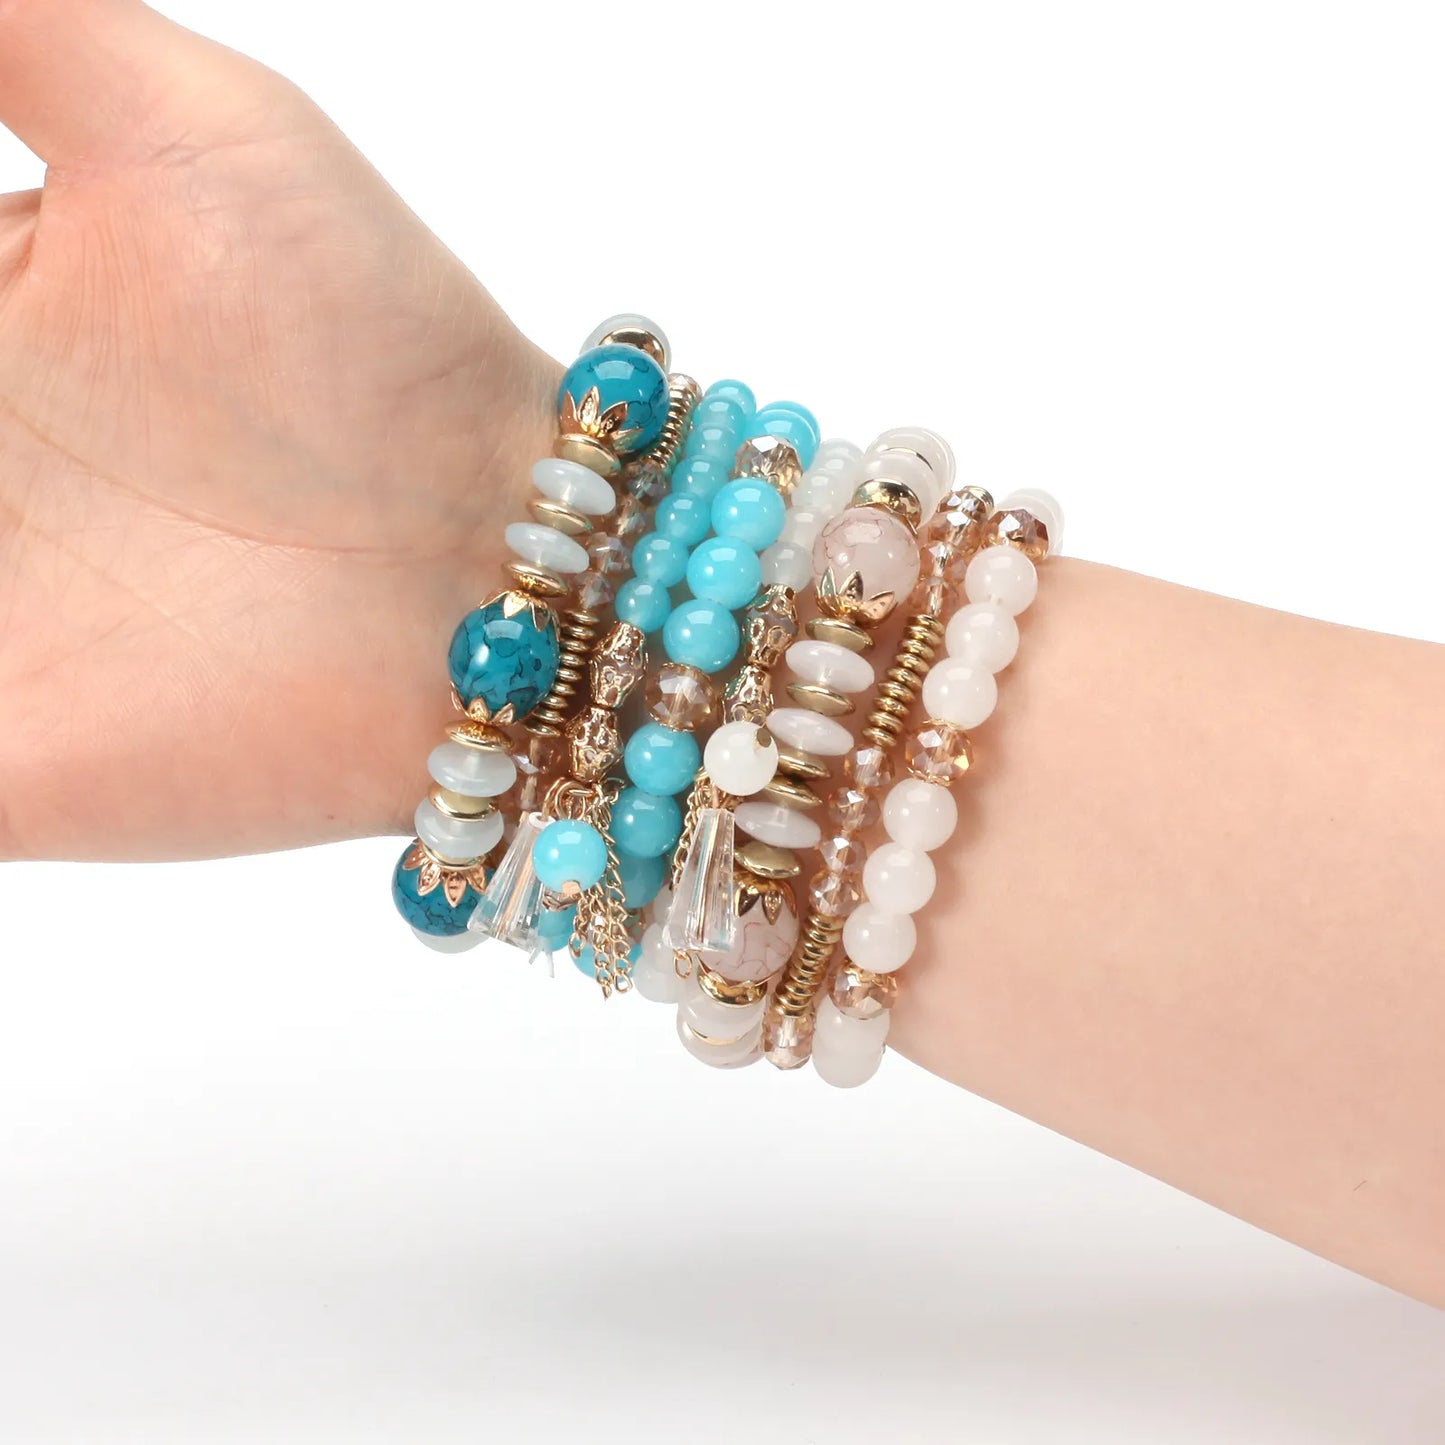 Multilayered Stackable Bead Bracelets for Women's